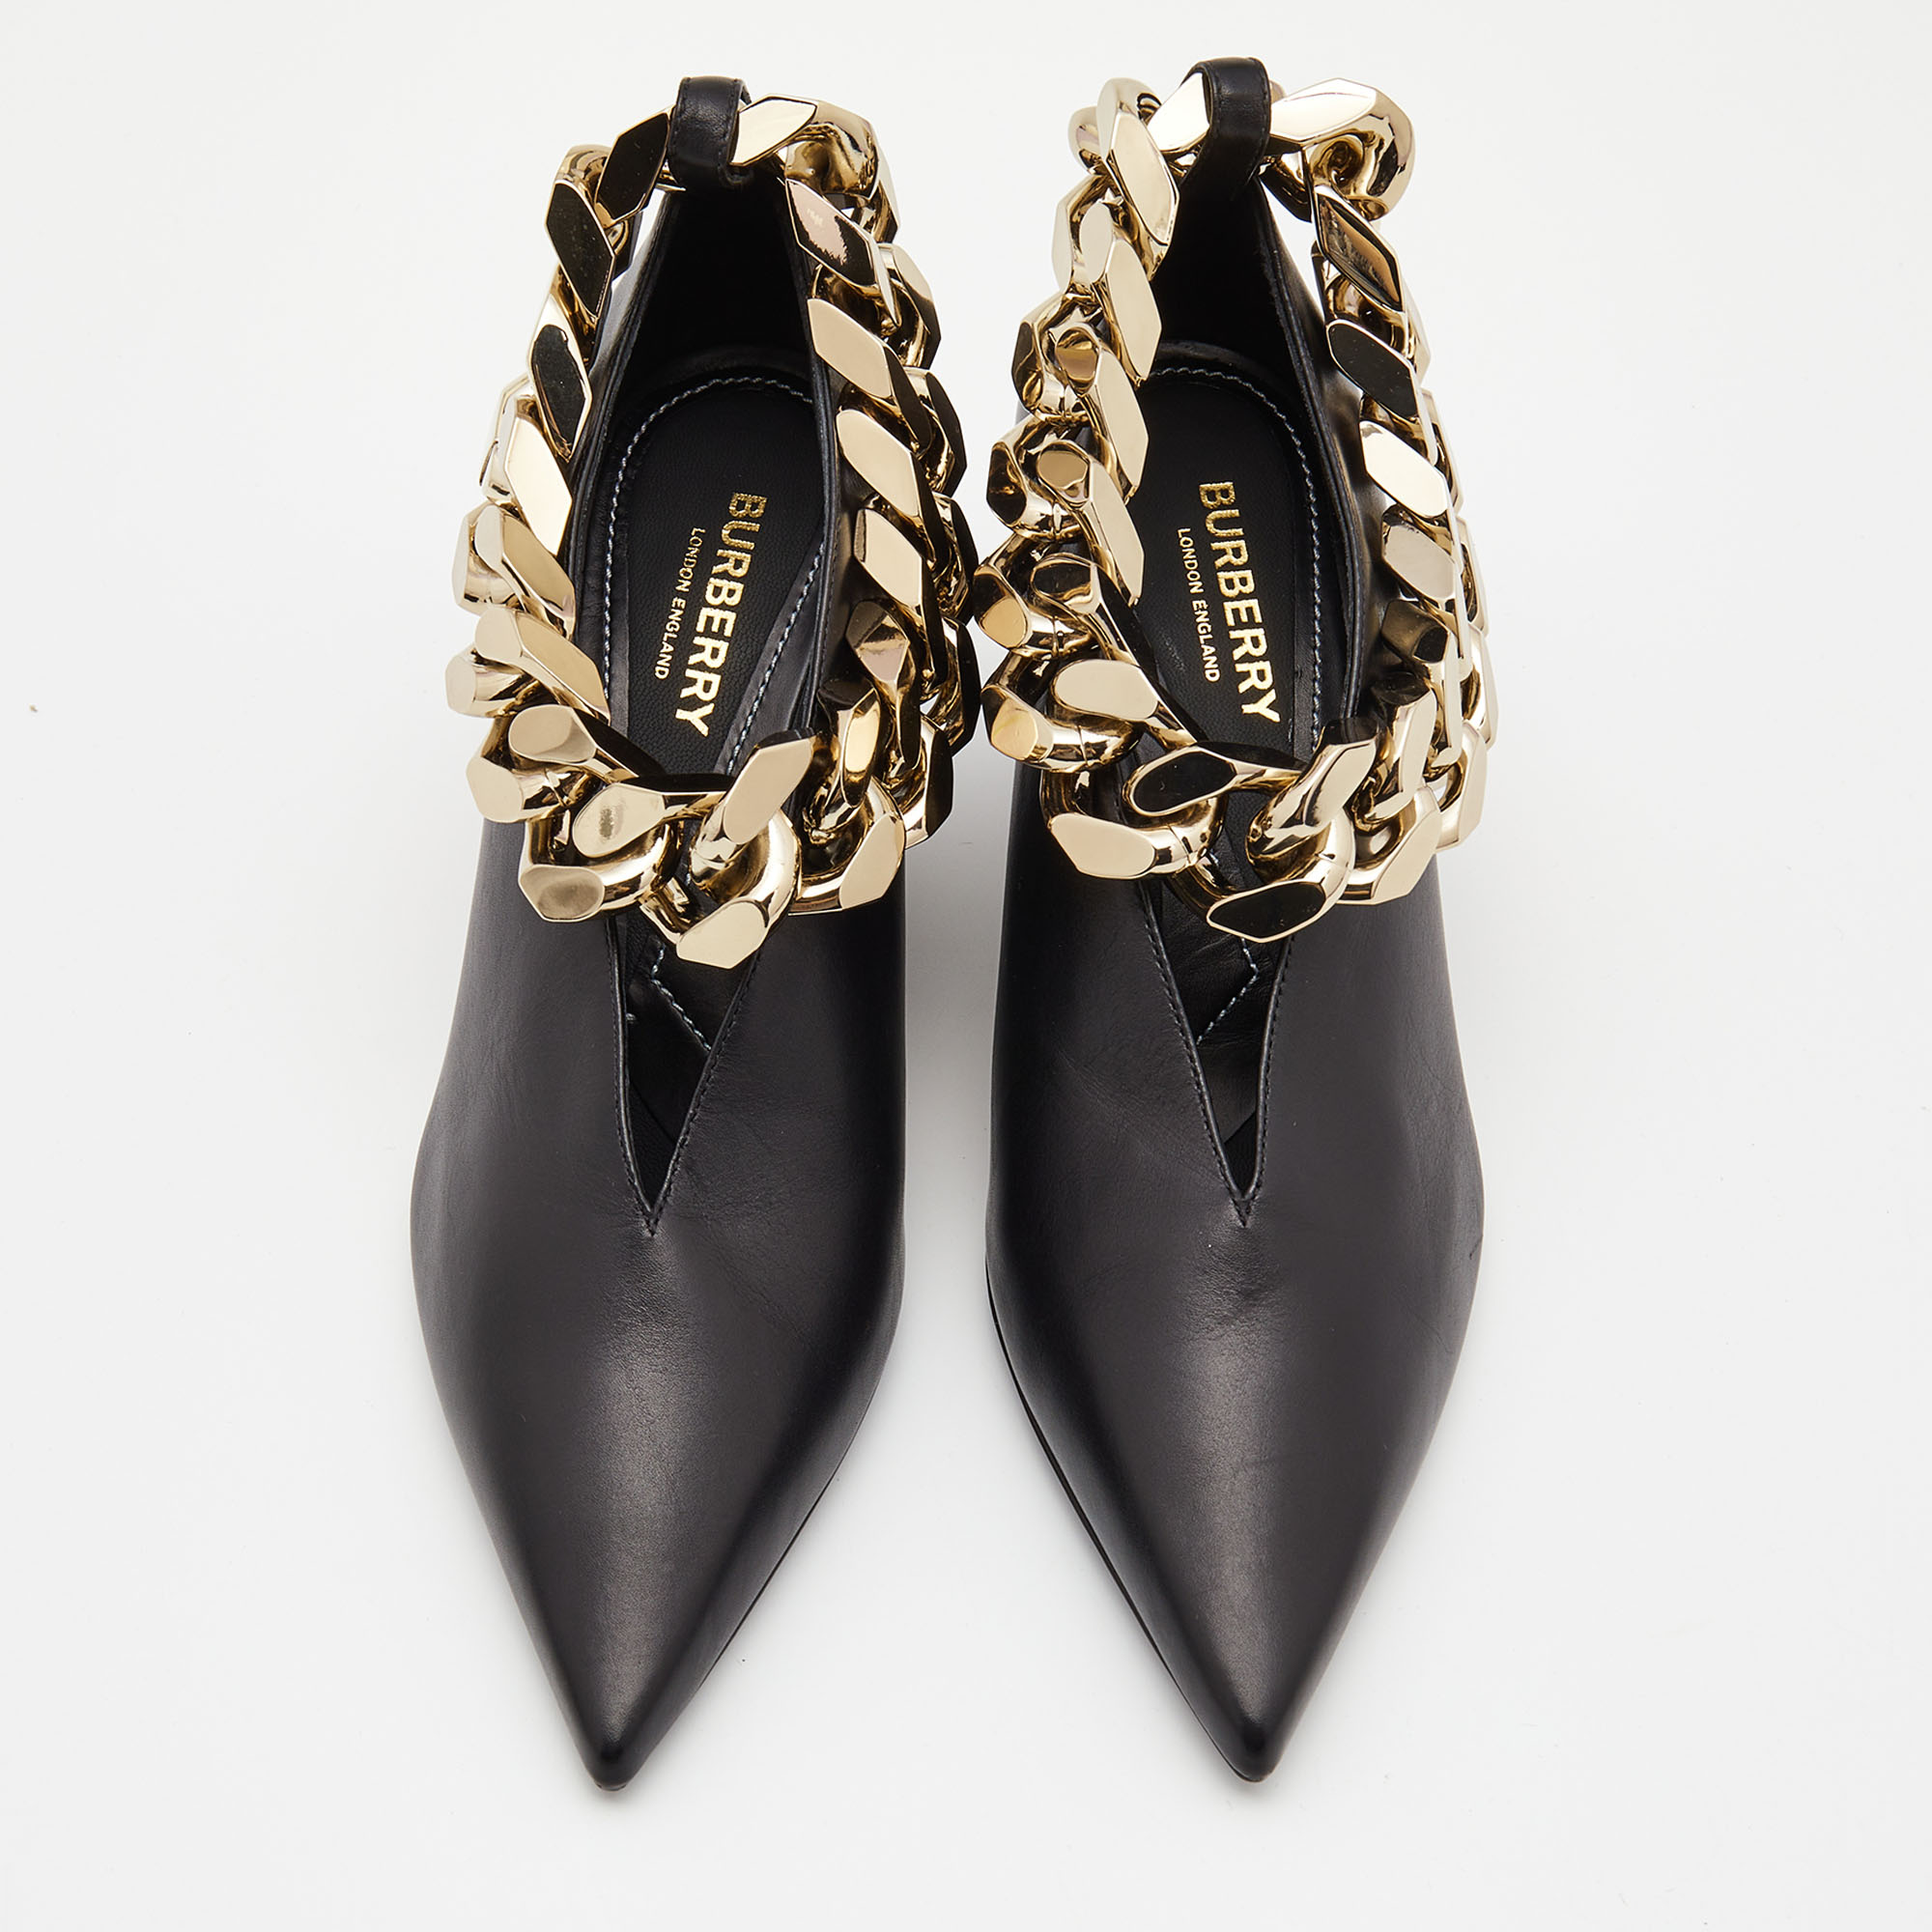 Burberry Black Leather  Chain Embellished Pumps Size 36